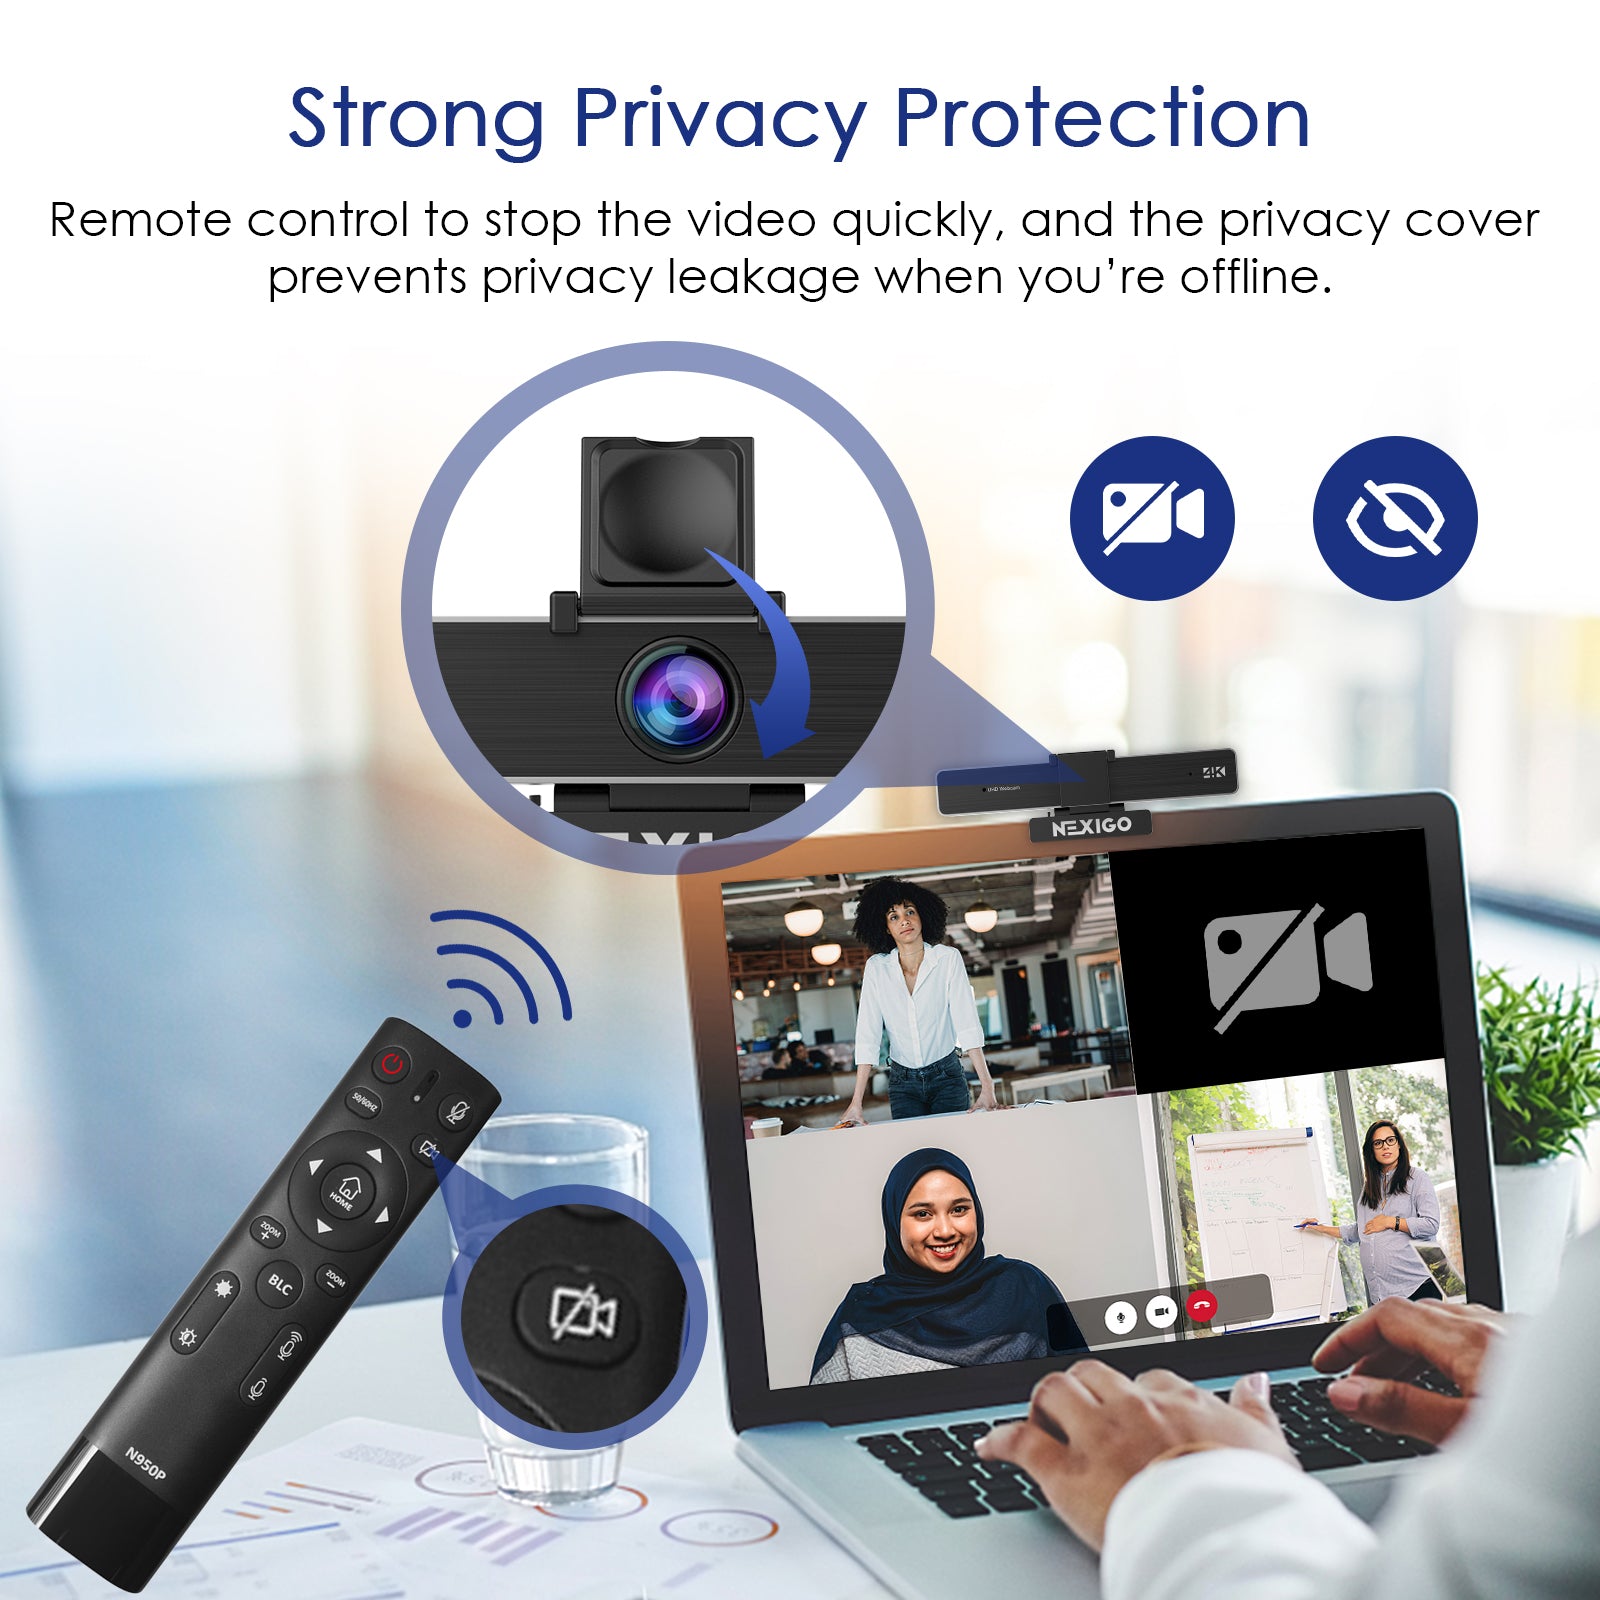 Double privacy protection: 1. Use the privacy cover 2. Use the remote control to turn off the camera